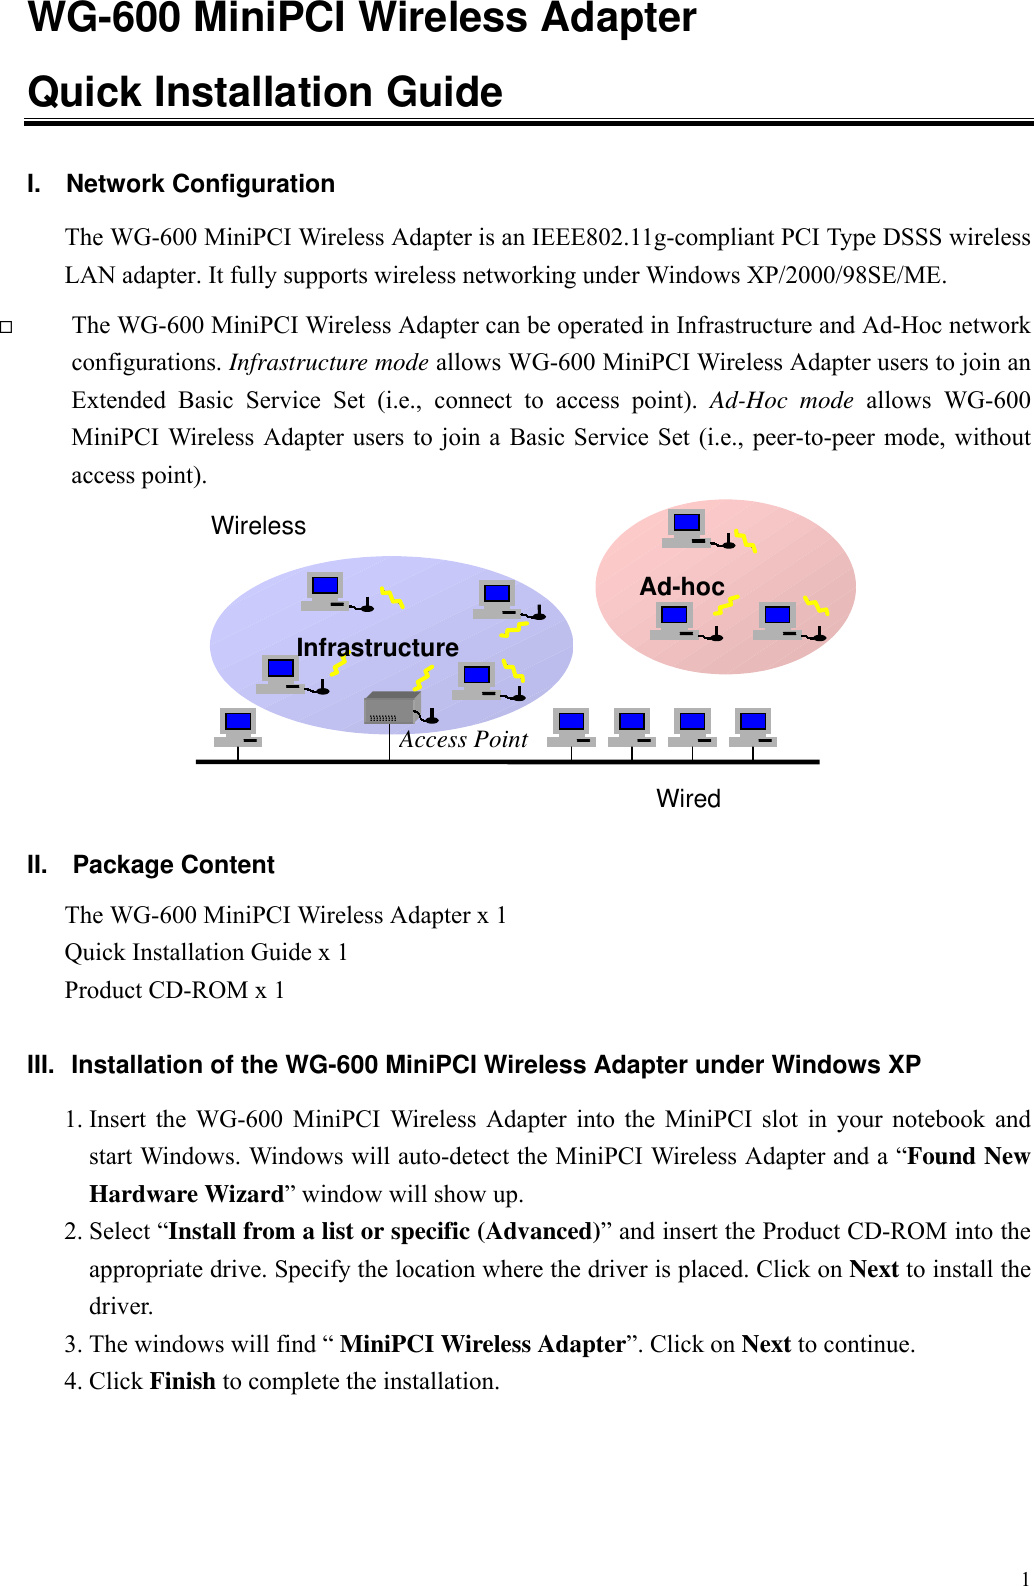 1WG-600 MiniPCI Wireless AdapterQuick Installation Guide   I. Network ConfigurationThe WG-600 MiniPCI Wireless Adapter is an IEEE802.11g-compliant PCI Type DSSS wirelessLAN adapter. It fully supports wireless networking under Windows XP/2000/98SE/ME. The WG-600 MiniPCI Wireless Adapter can be operated in Infrastructure and Ad-Hoc networkconfigurations. Infrastructure mode allows WG-600 MiniPCI Wireless Adapter users to join anExtended Basic Service Set (i.e., connect to access point). Ad-Hoc mode allows WG-600MiniPCI Wireless Adapter users to join a Basic Service Set (i.e., peer-to-peer mode, withoutaccess point).II.  Package ContentThe WG-600 MiniPCI Wireless Adapter x 1Quick Installation Guide x 1Product CD-ROM x 1III.  Installation of the WG-600 MiniPCI Wireless Adapter under Windows XP1. Insert the WG-600 MiniPCI Wireless Adapter into the MiniPCI slot in your notebook andstart Windows. Windows will auto-detect the MiniPCI Wireless Adapter and a “Found NewHardware Wizard” window will show up.2. Select “Install from a list or specific (Advanced)” and insert the Product CD-ROM into theappropriate drive. Specify the location where the driver is placed. Click on Next to install thedriver.3. The windows will find “ MiniPCI Wireless Adapter”. Click on Next to continue.4. Click Finish to complete the installation.InfrastructureAd-hocWiredWirelessAccess Point